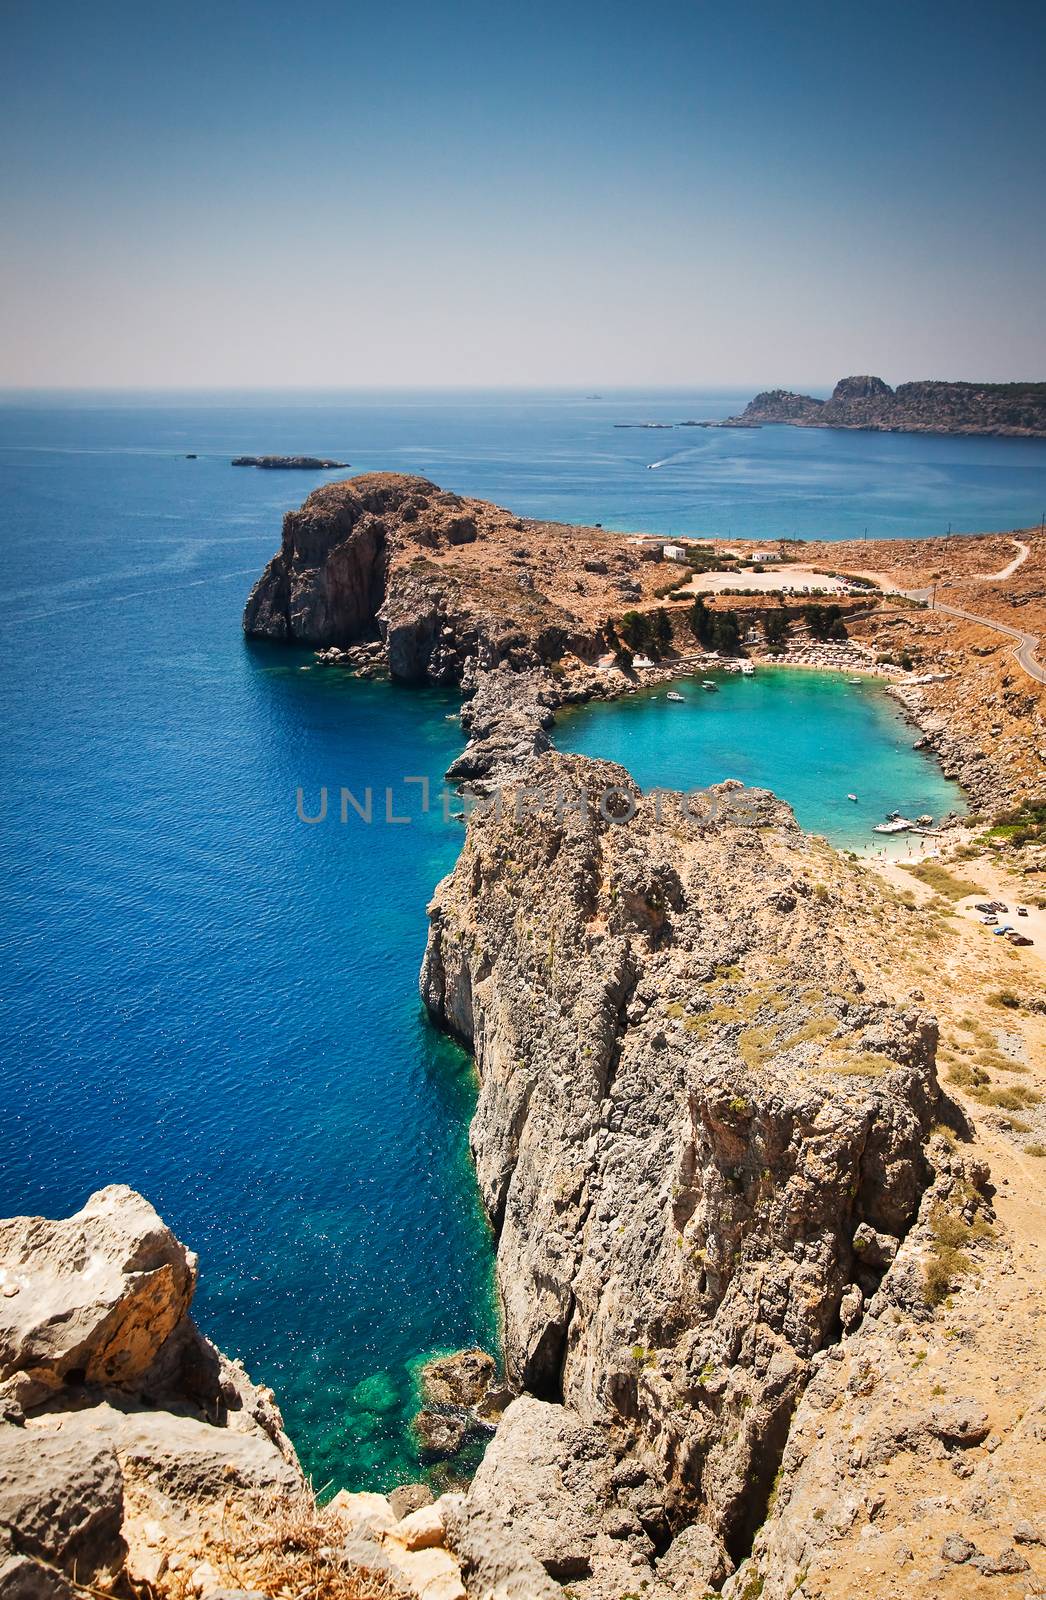 Looking down onto St Paul's Bay at Lindos on the Island of Rhode by melis